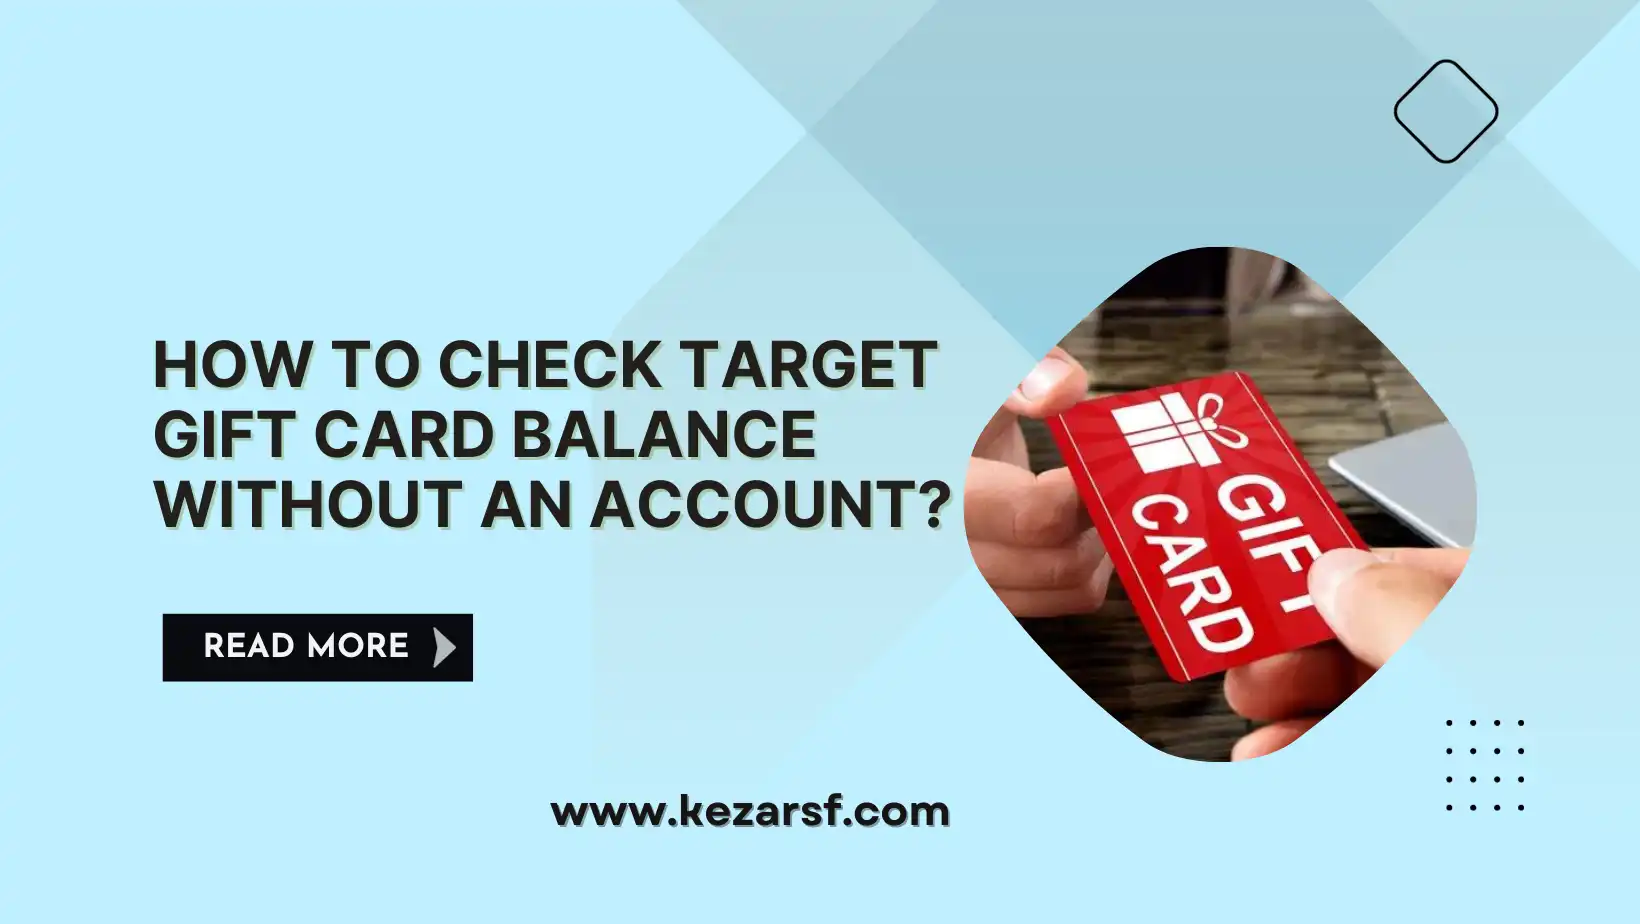 How to check Target gift card balance without an account?